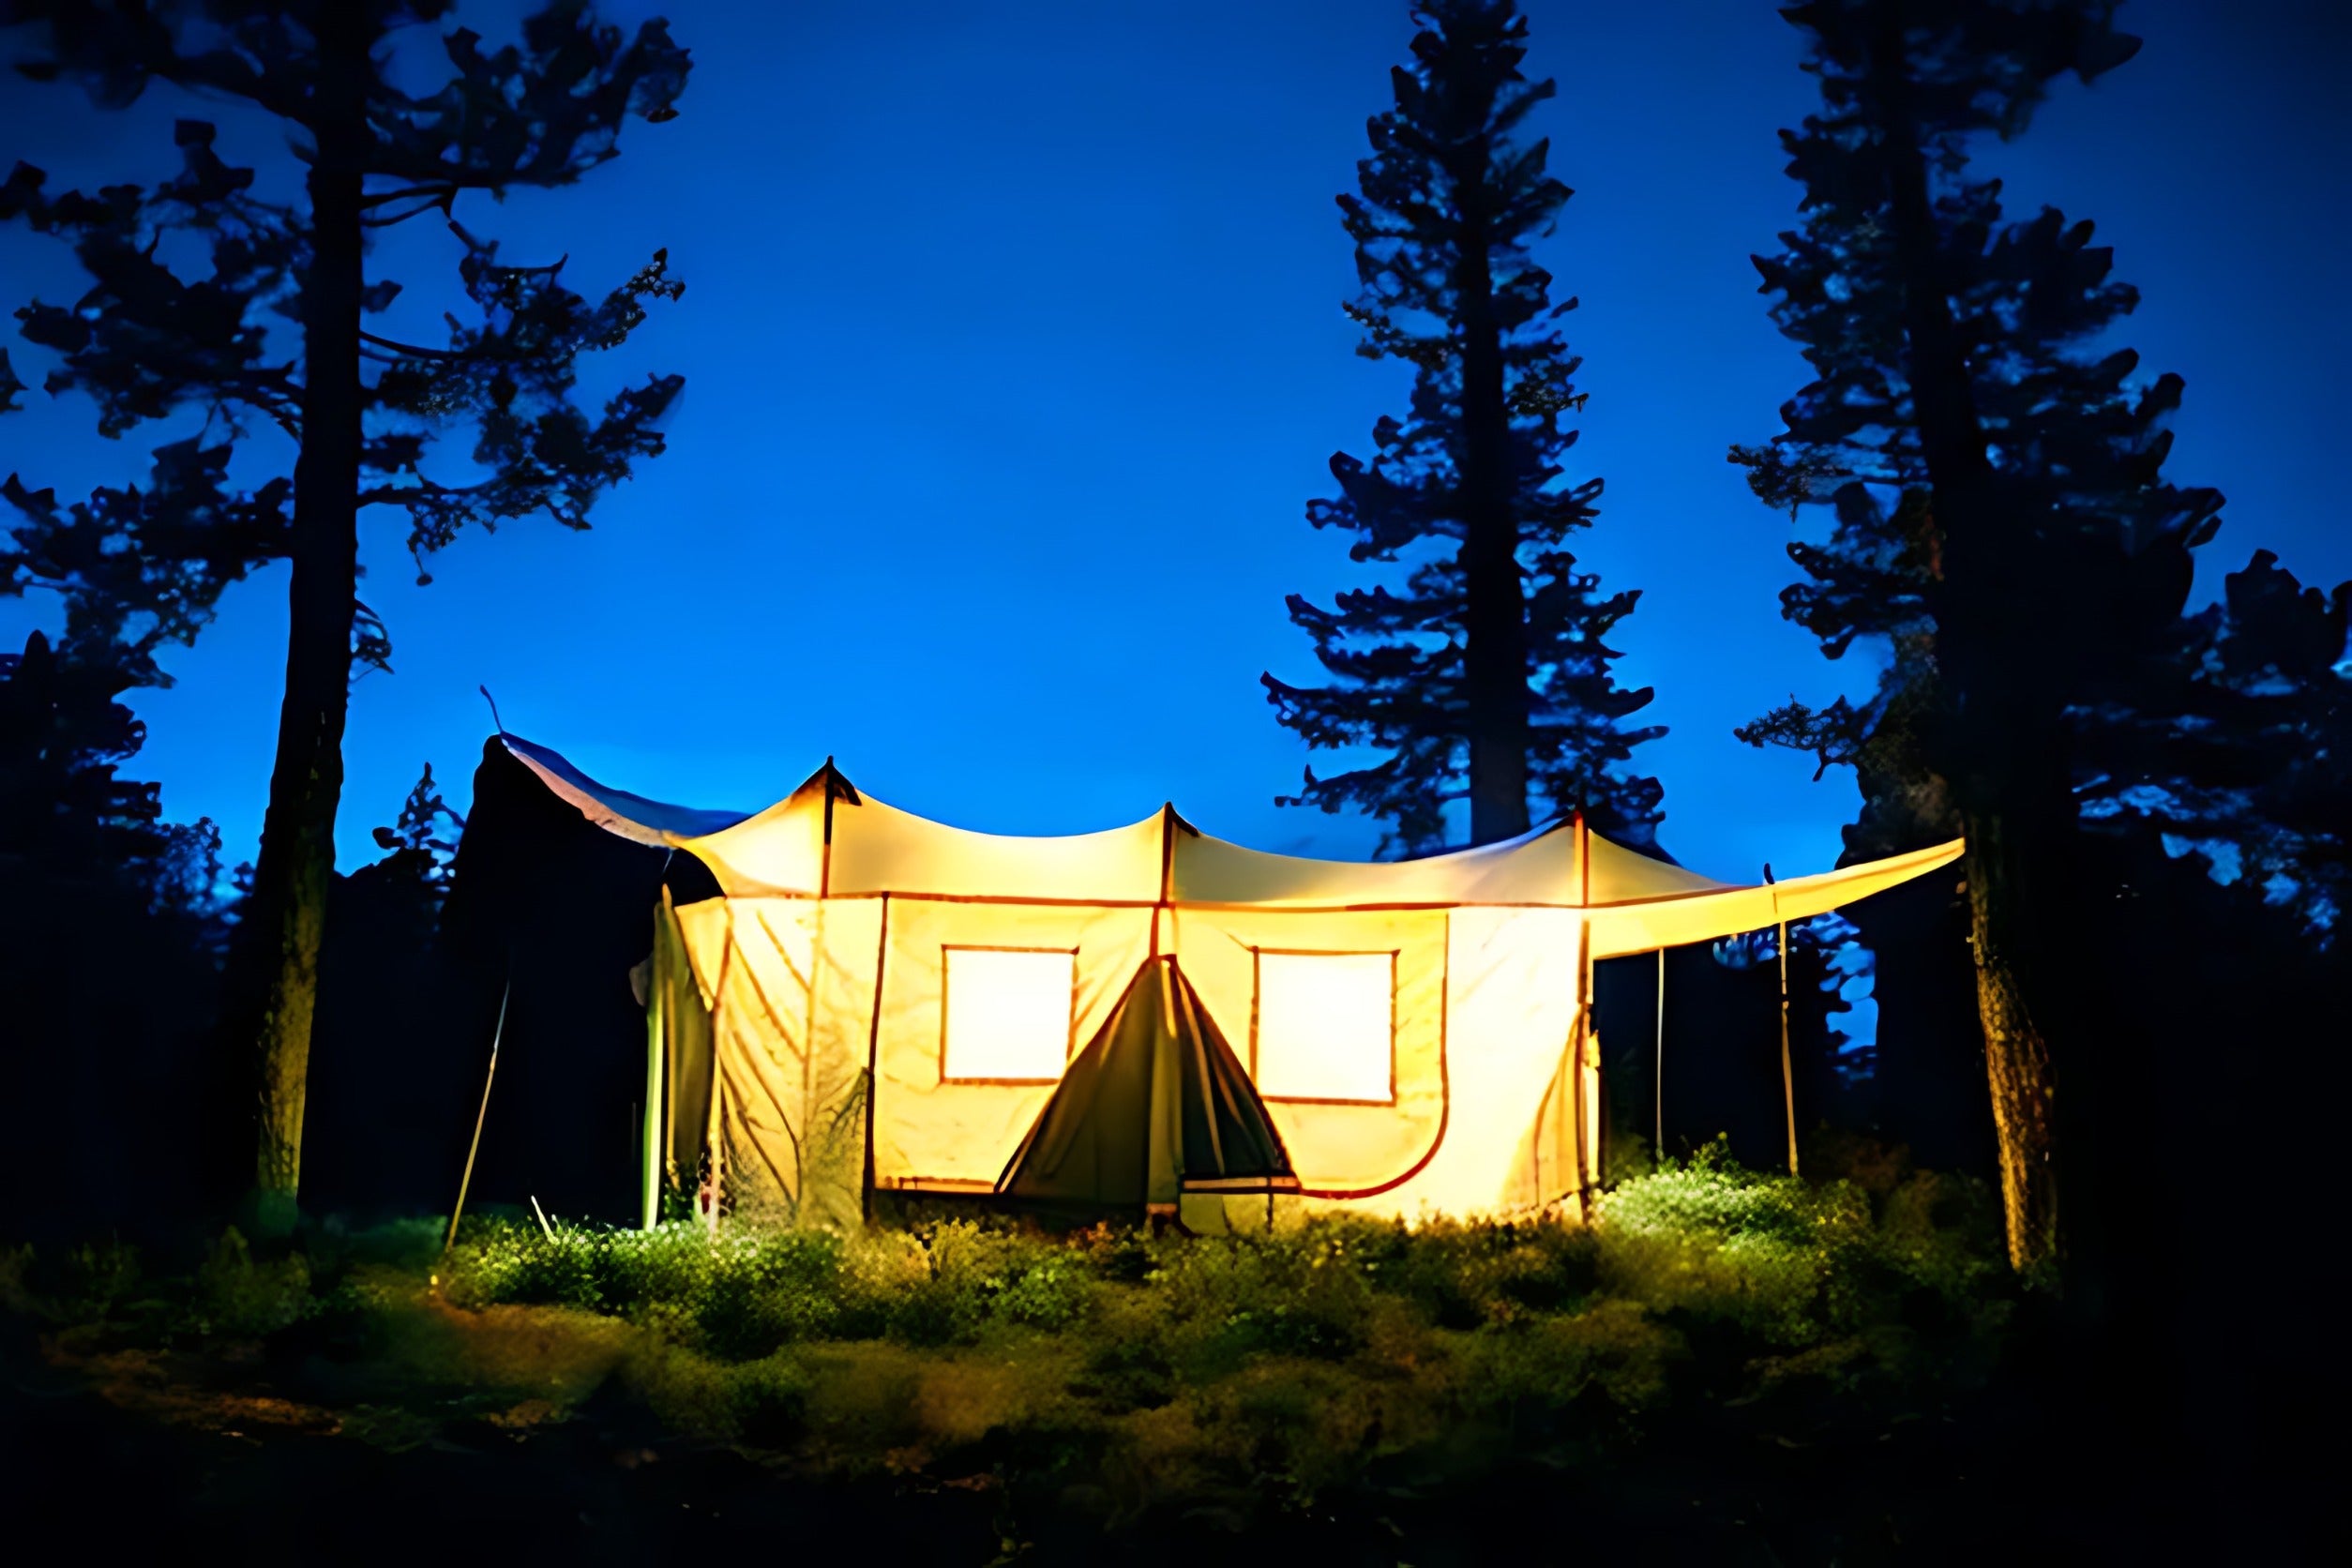 What Are Outfitter Tents? What Are Outfitting Tents Used For?